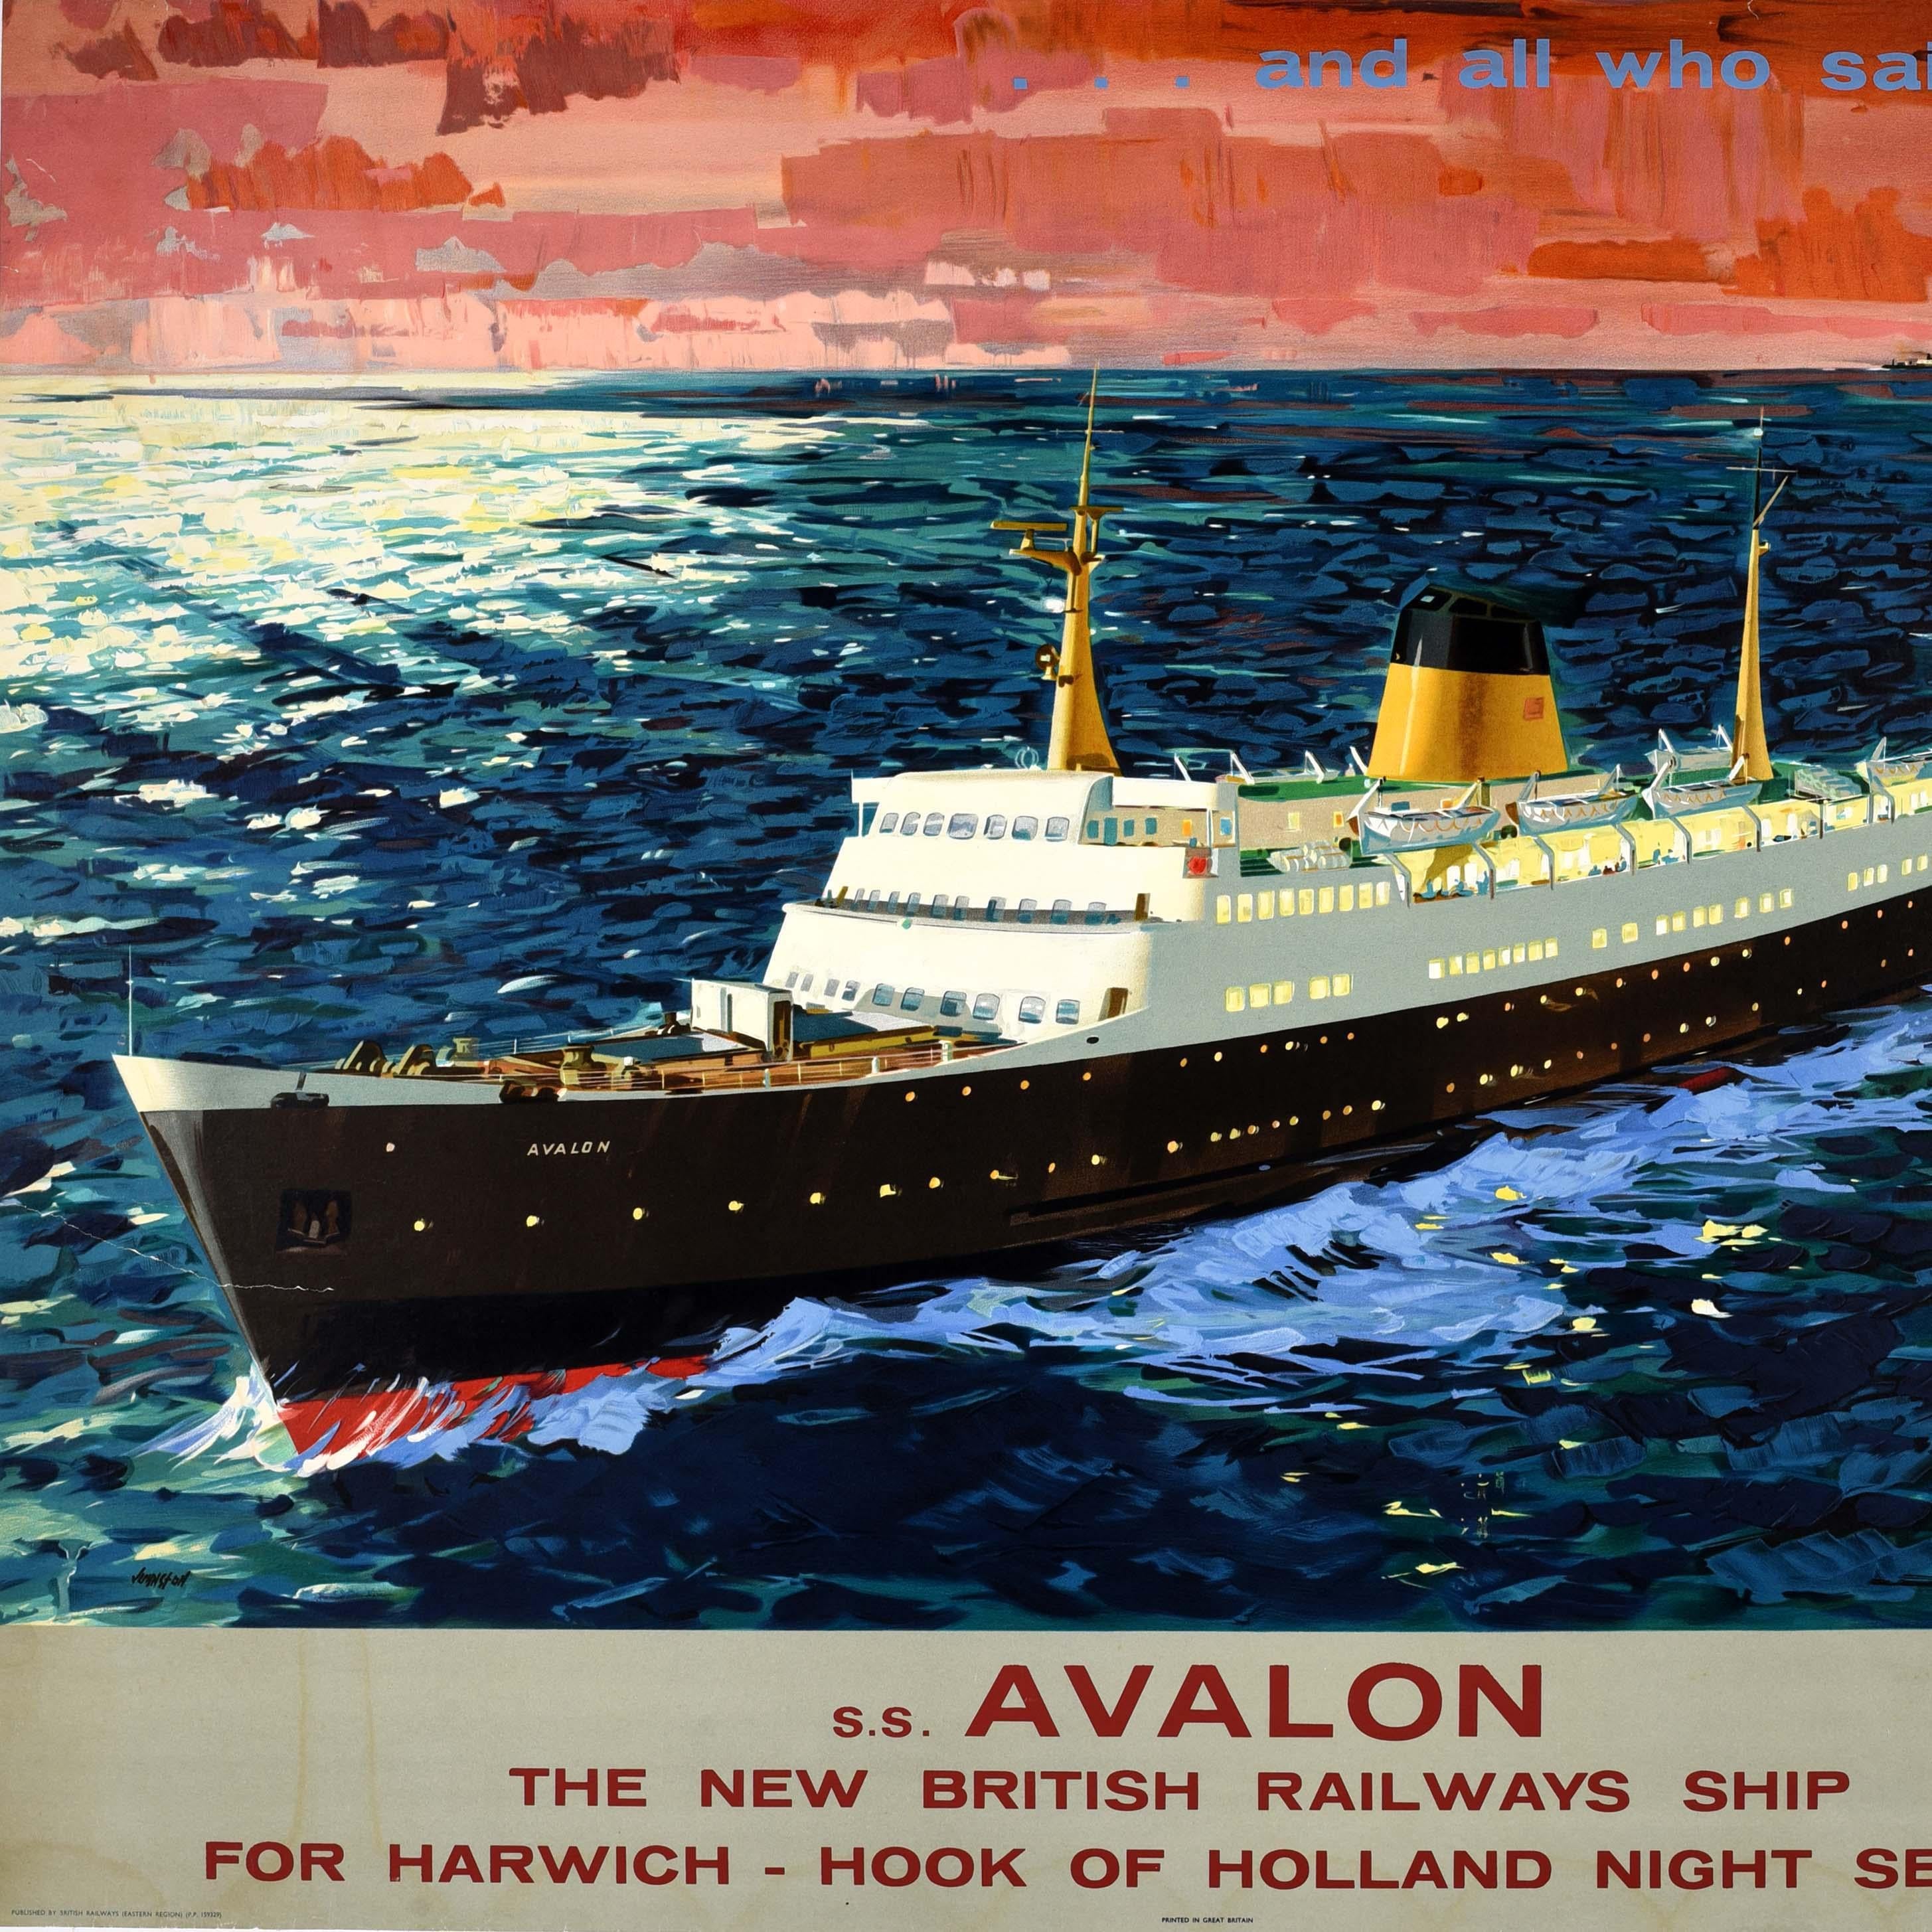 Original vintage travel advertising poster published by British Railways Eastern Region for the S.S. Avalon The New British Railways Ship For Harwich Hook Of Holland Night Service featuring artwork by Robert Johnston (1906-1983) depicting the